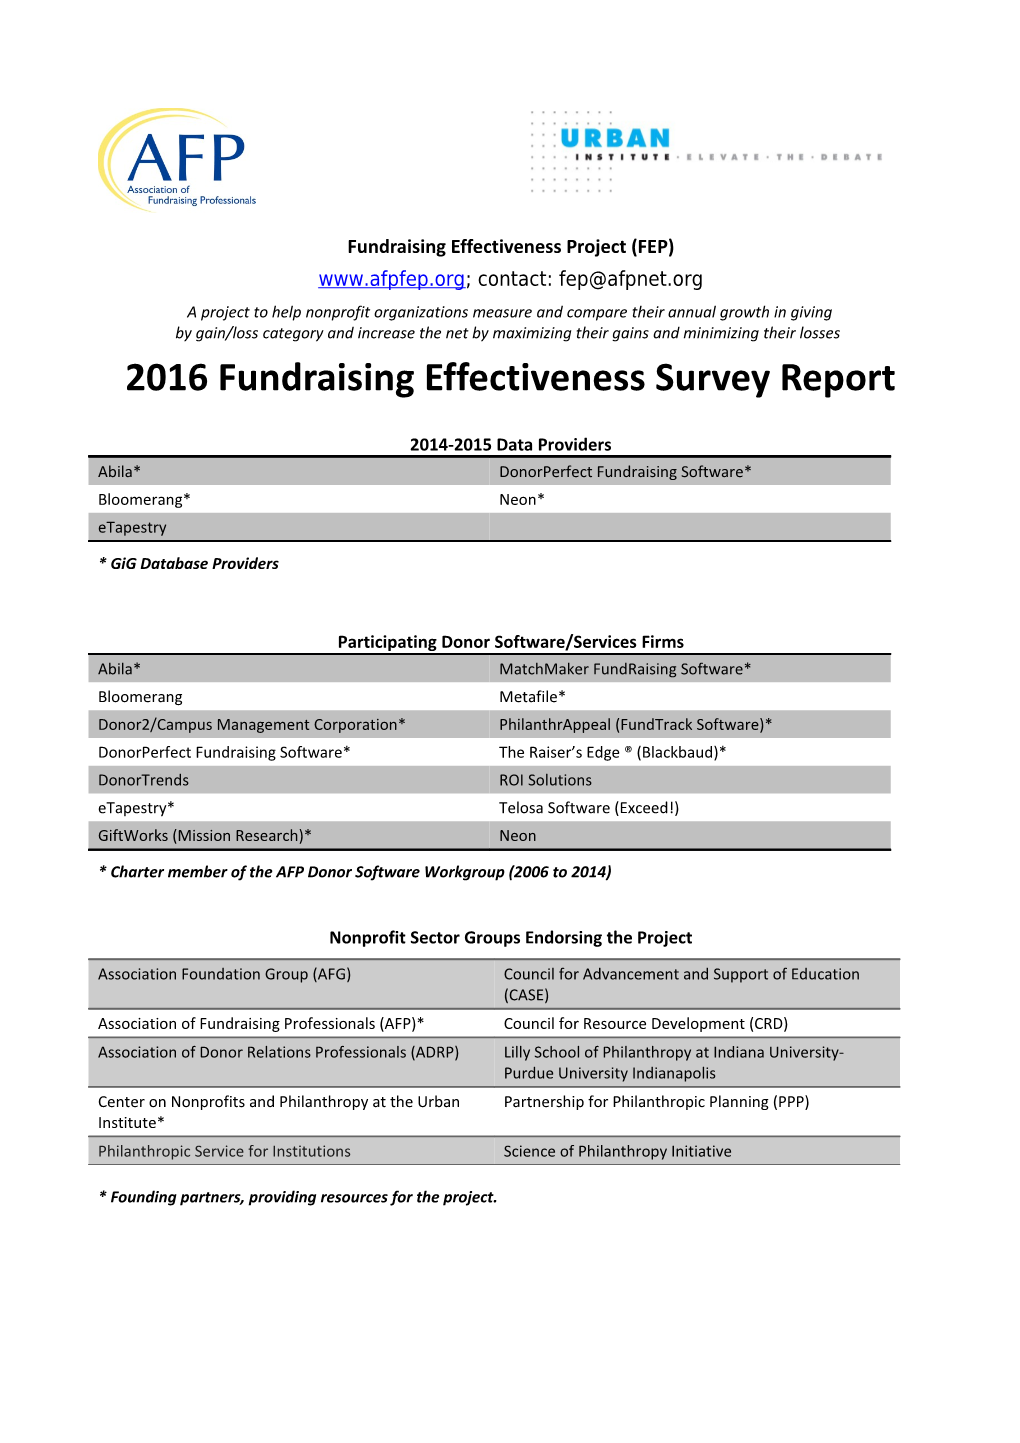 Participating Donor Software/Services Firms